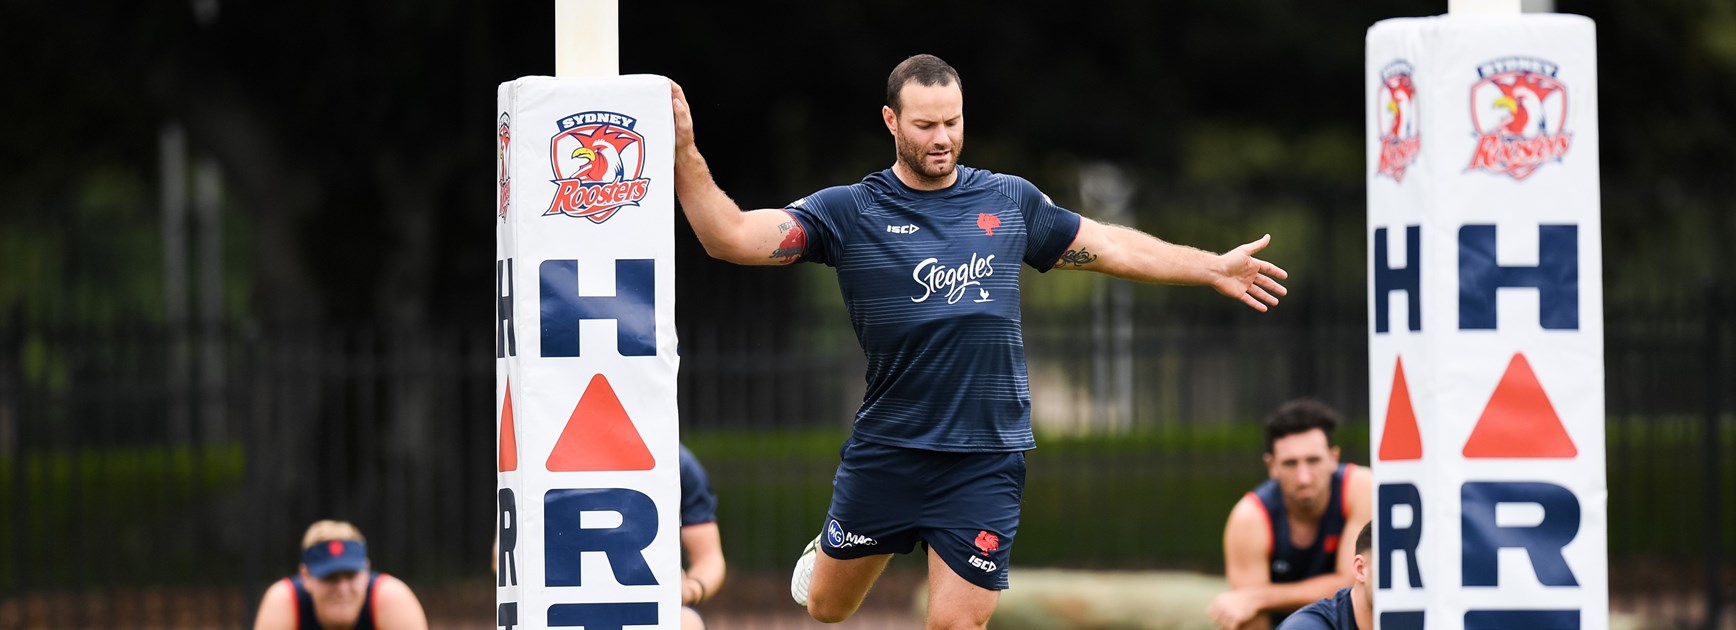 Origin over so it's down to title business for Cordner